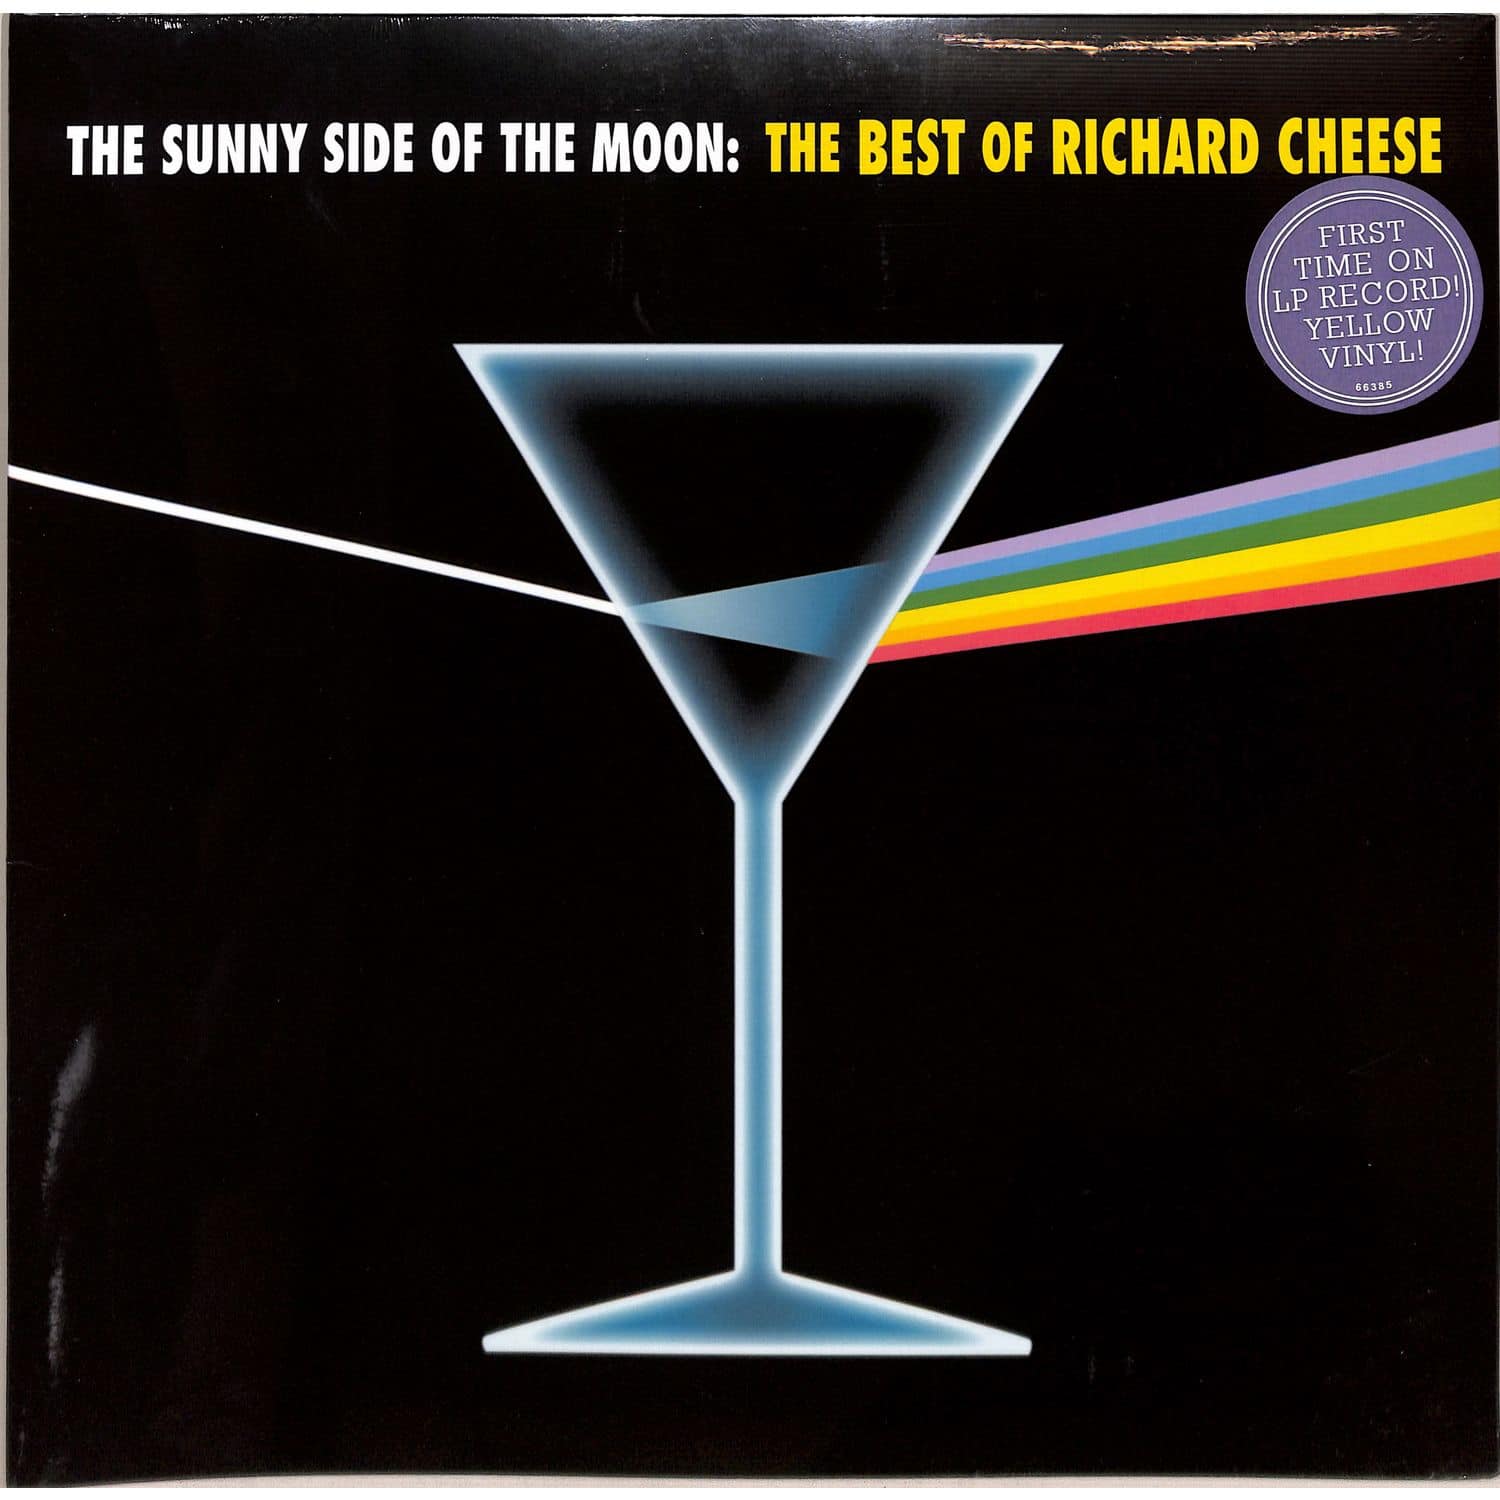 Richard Cheese - SUNNY SIDE OF THE MOON: THE BEST OF RICHARD CHEESE 